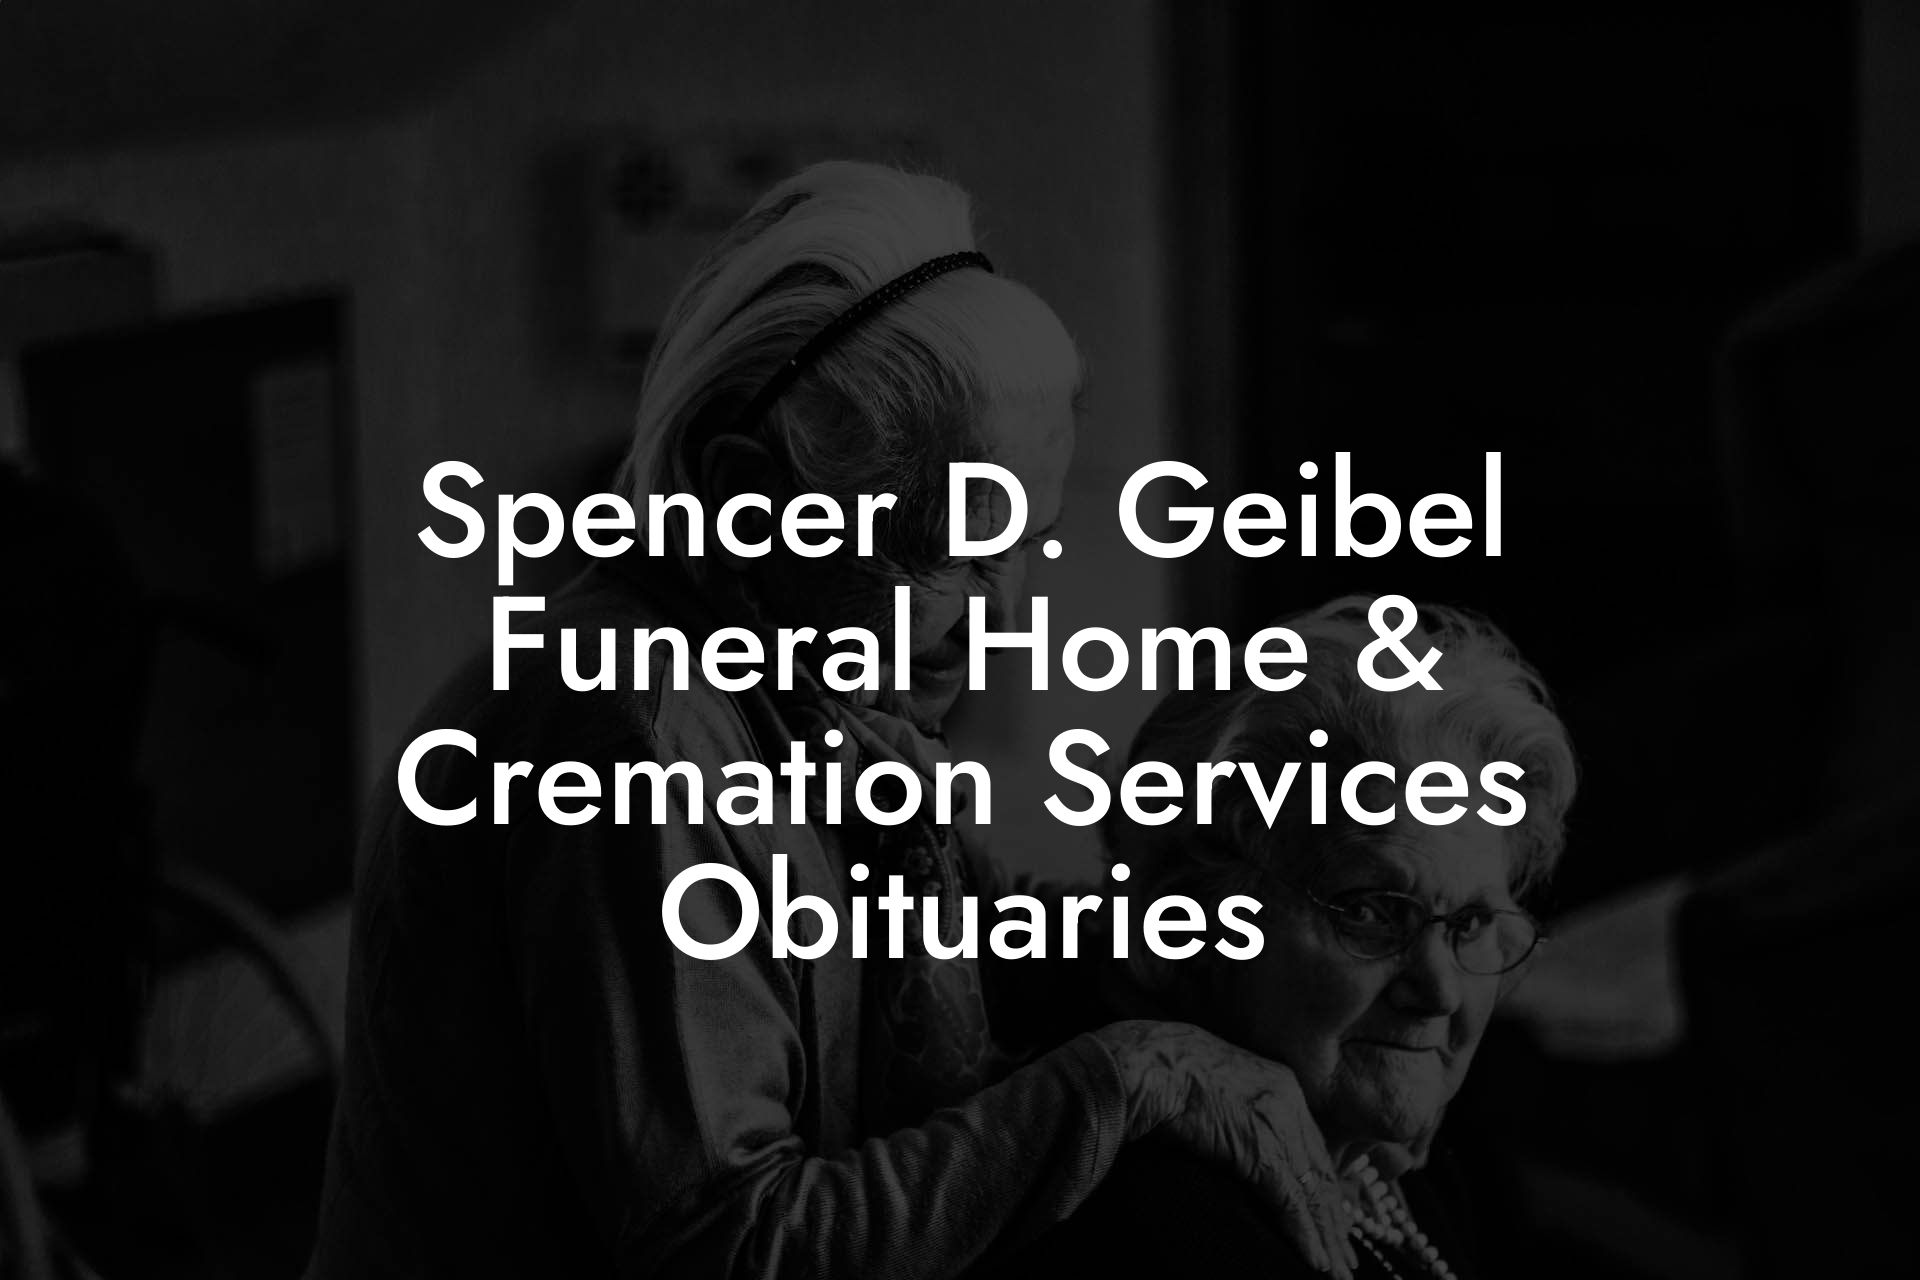 Spencer D. Geibel Funeral Home & Cremation Services Obituaries